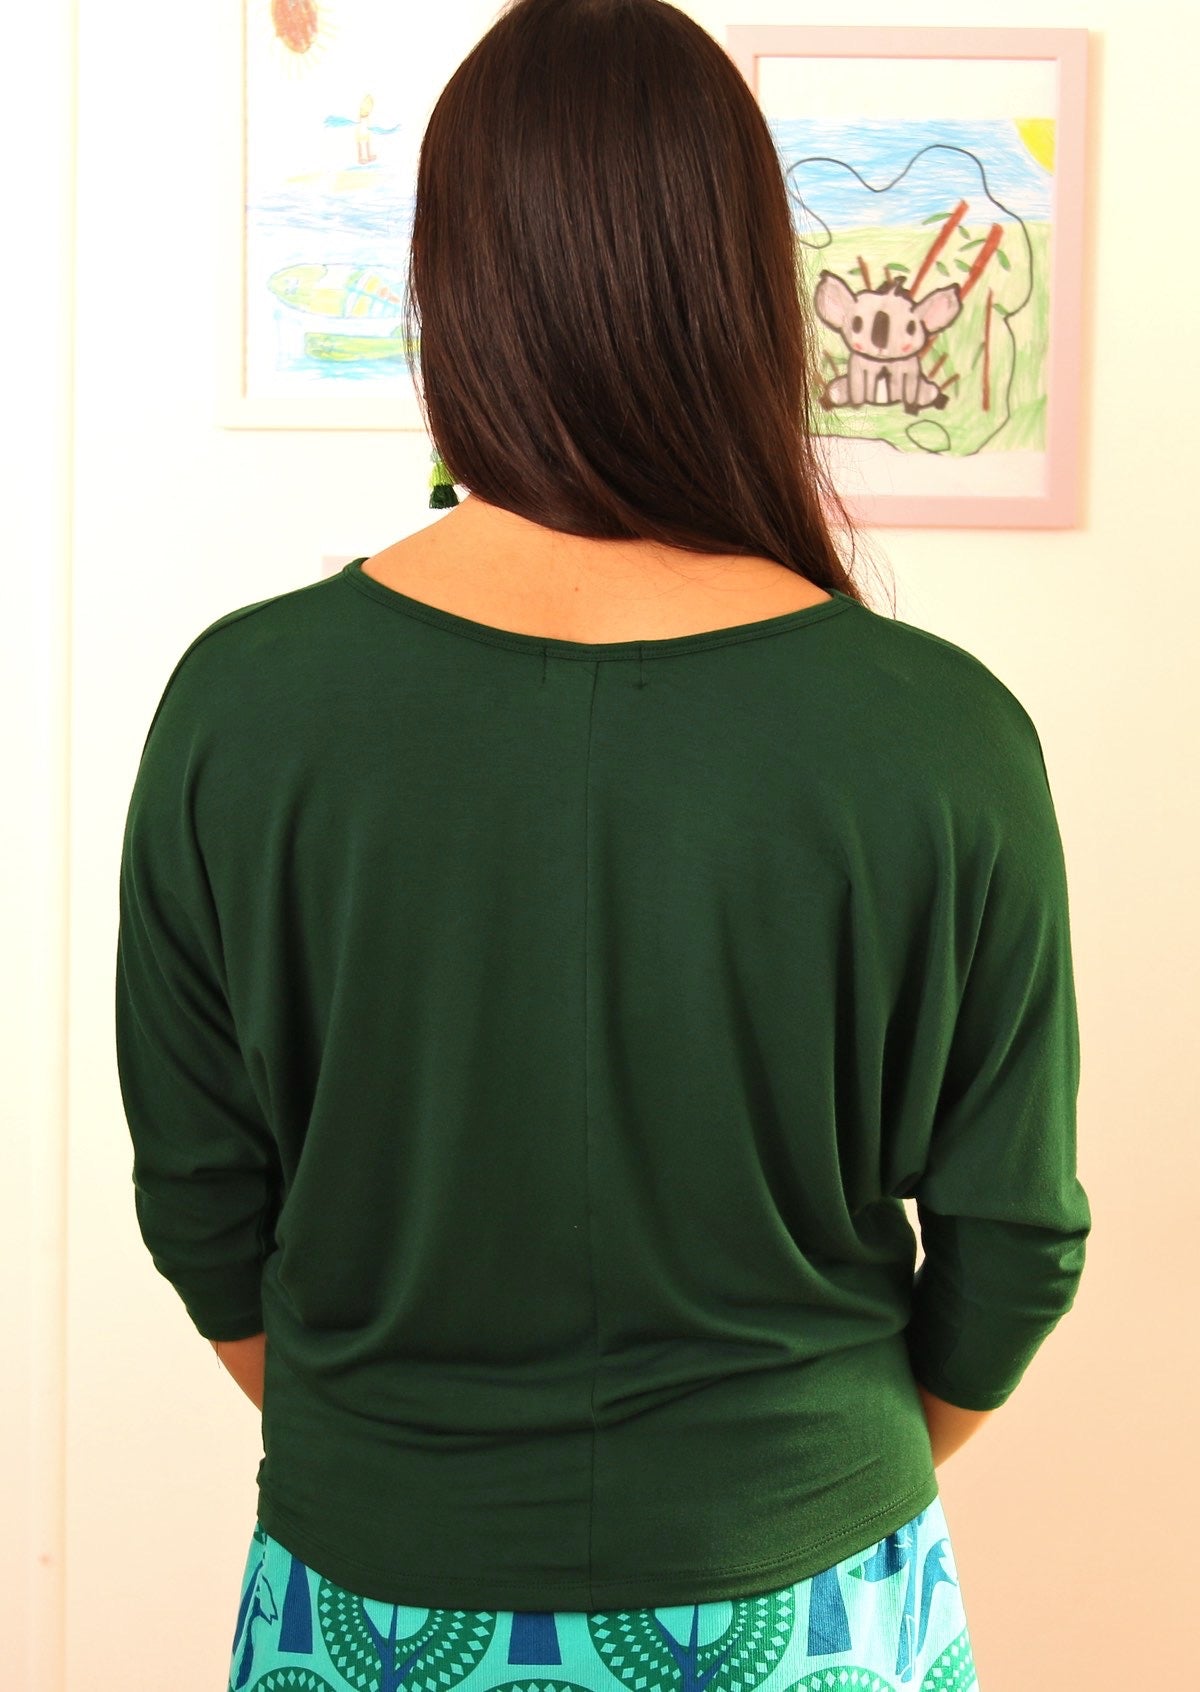 Back view of woman wearing a 3/4 sleeve rayon batwing round neckline green top.